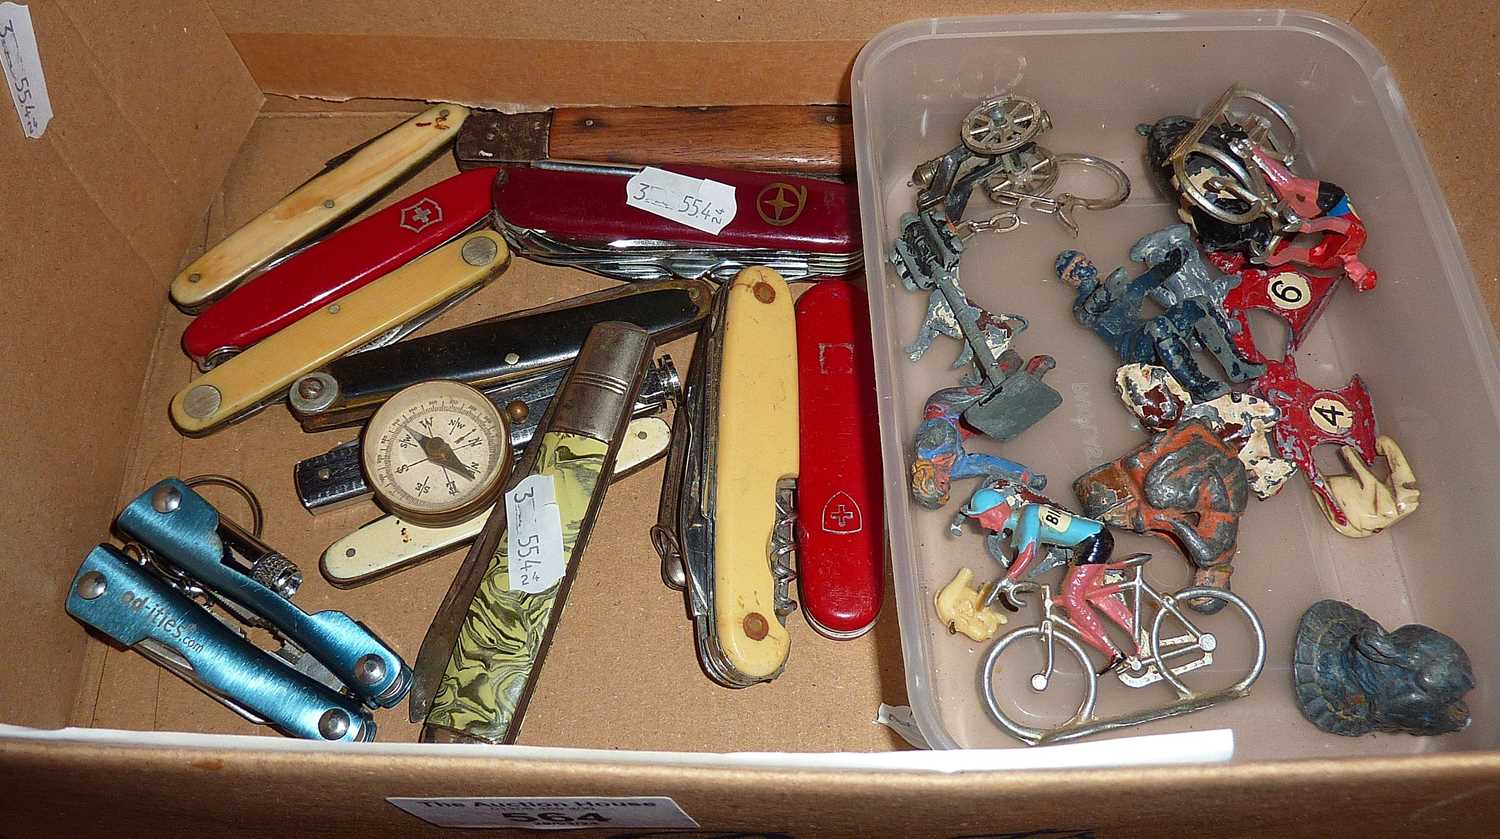 Assorted penknives, pocket knives & metal figures (please note that these items cannot be posted